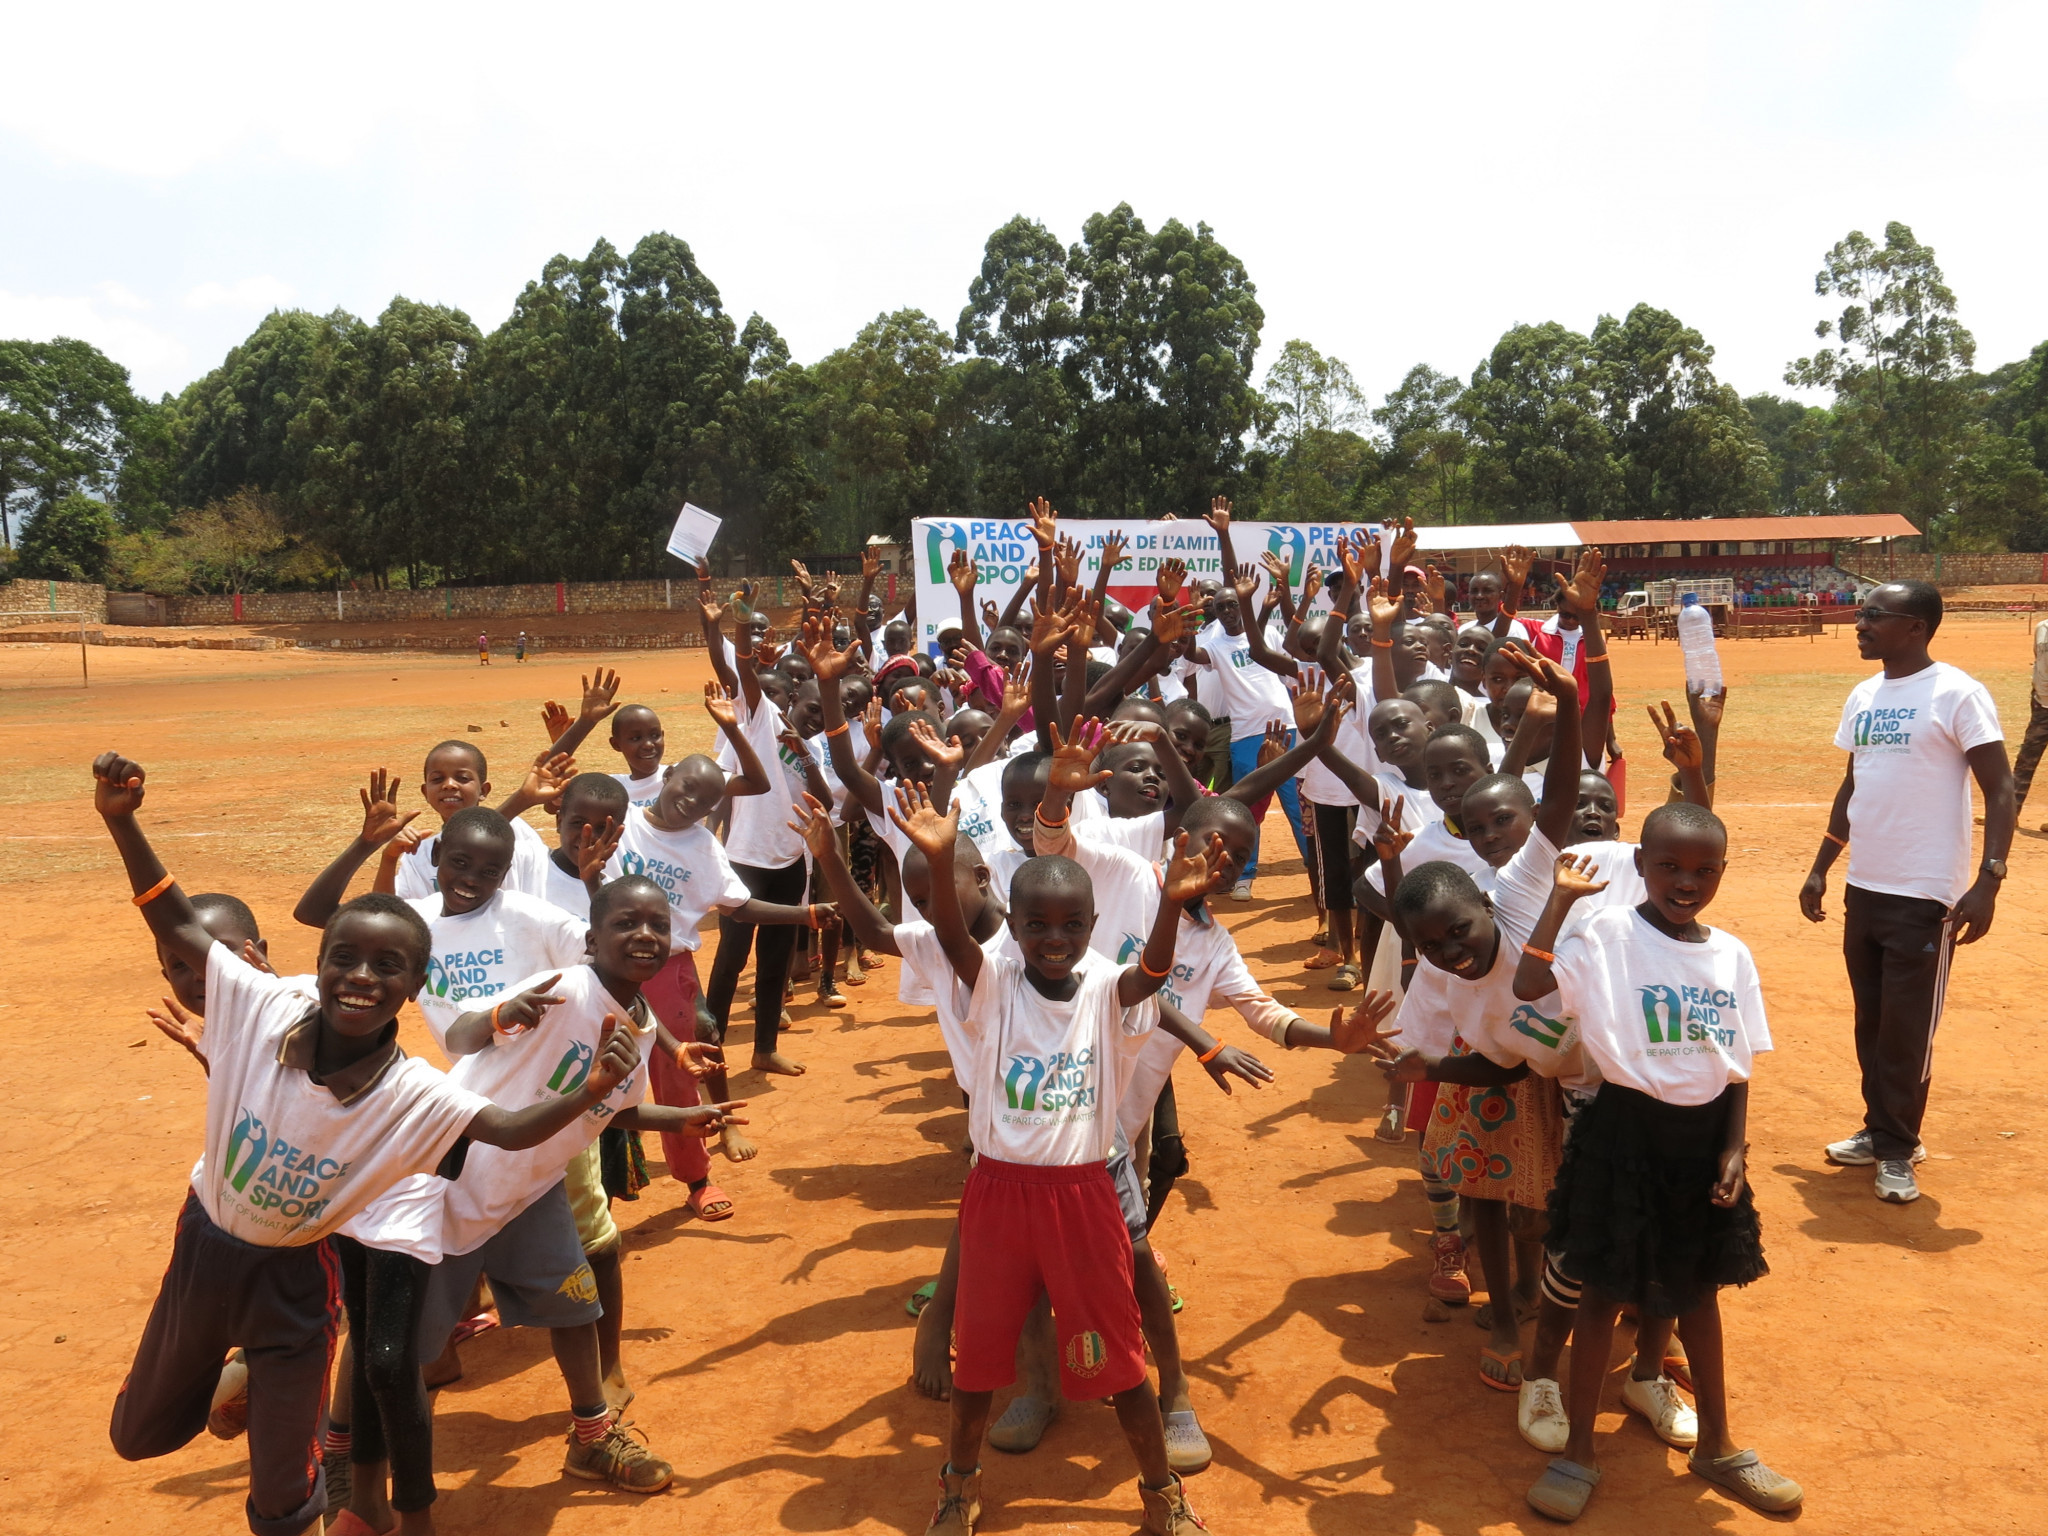 Around 250 children attended the 2019 Friendship Games ©Peace and Sport 